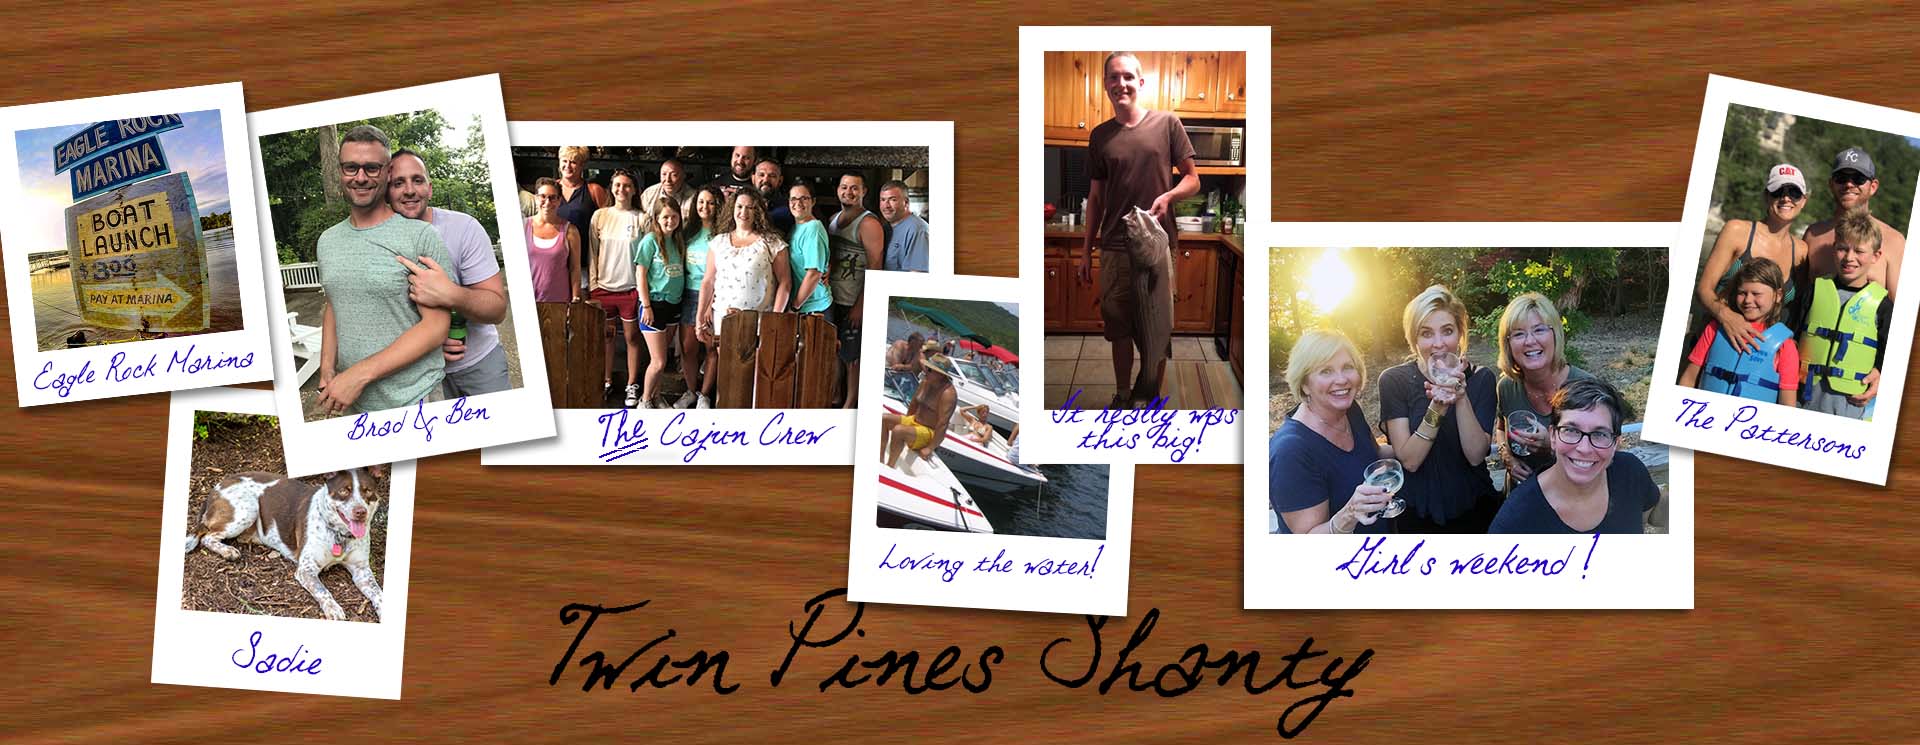 Twin Pines Shanty photo gallery header image